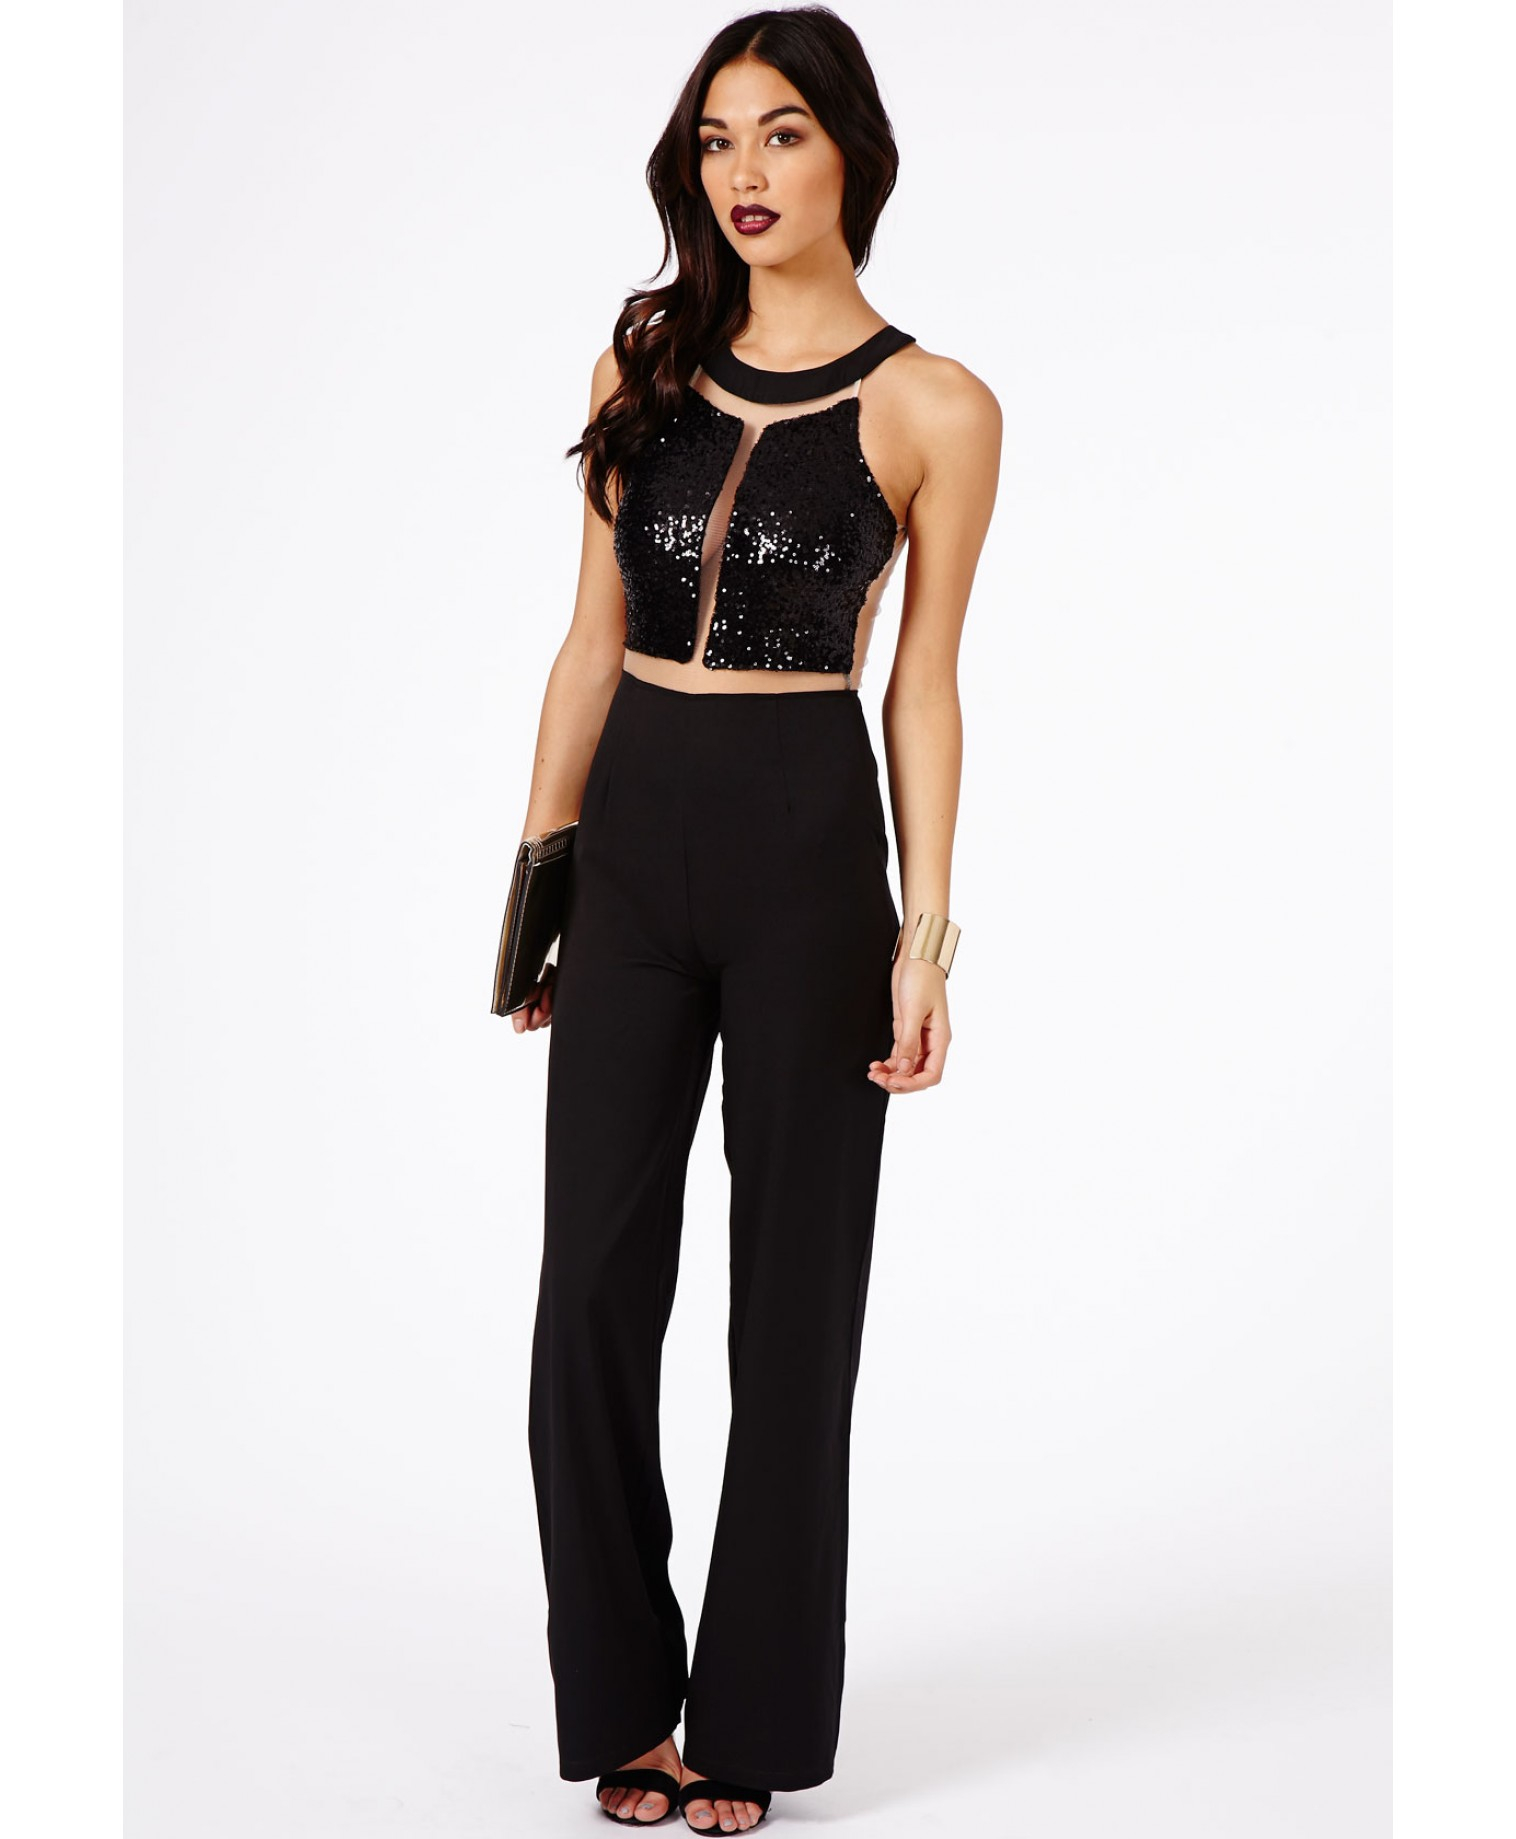 Lyst - Missguided Shaween Sequin Mesh Panelled Jumpsuit In Black in Black